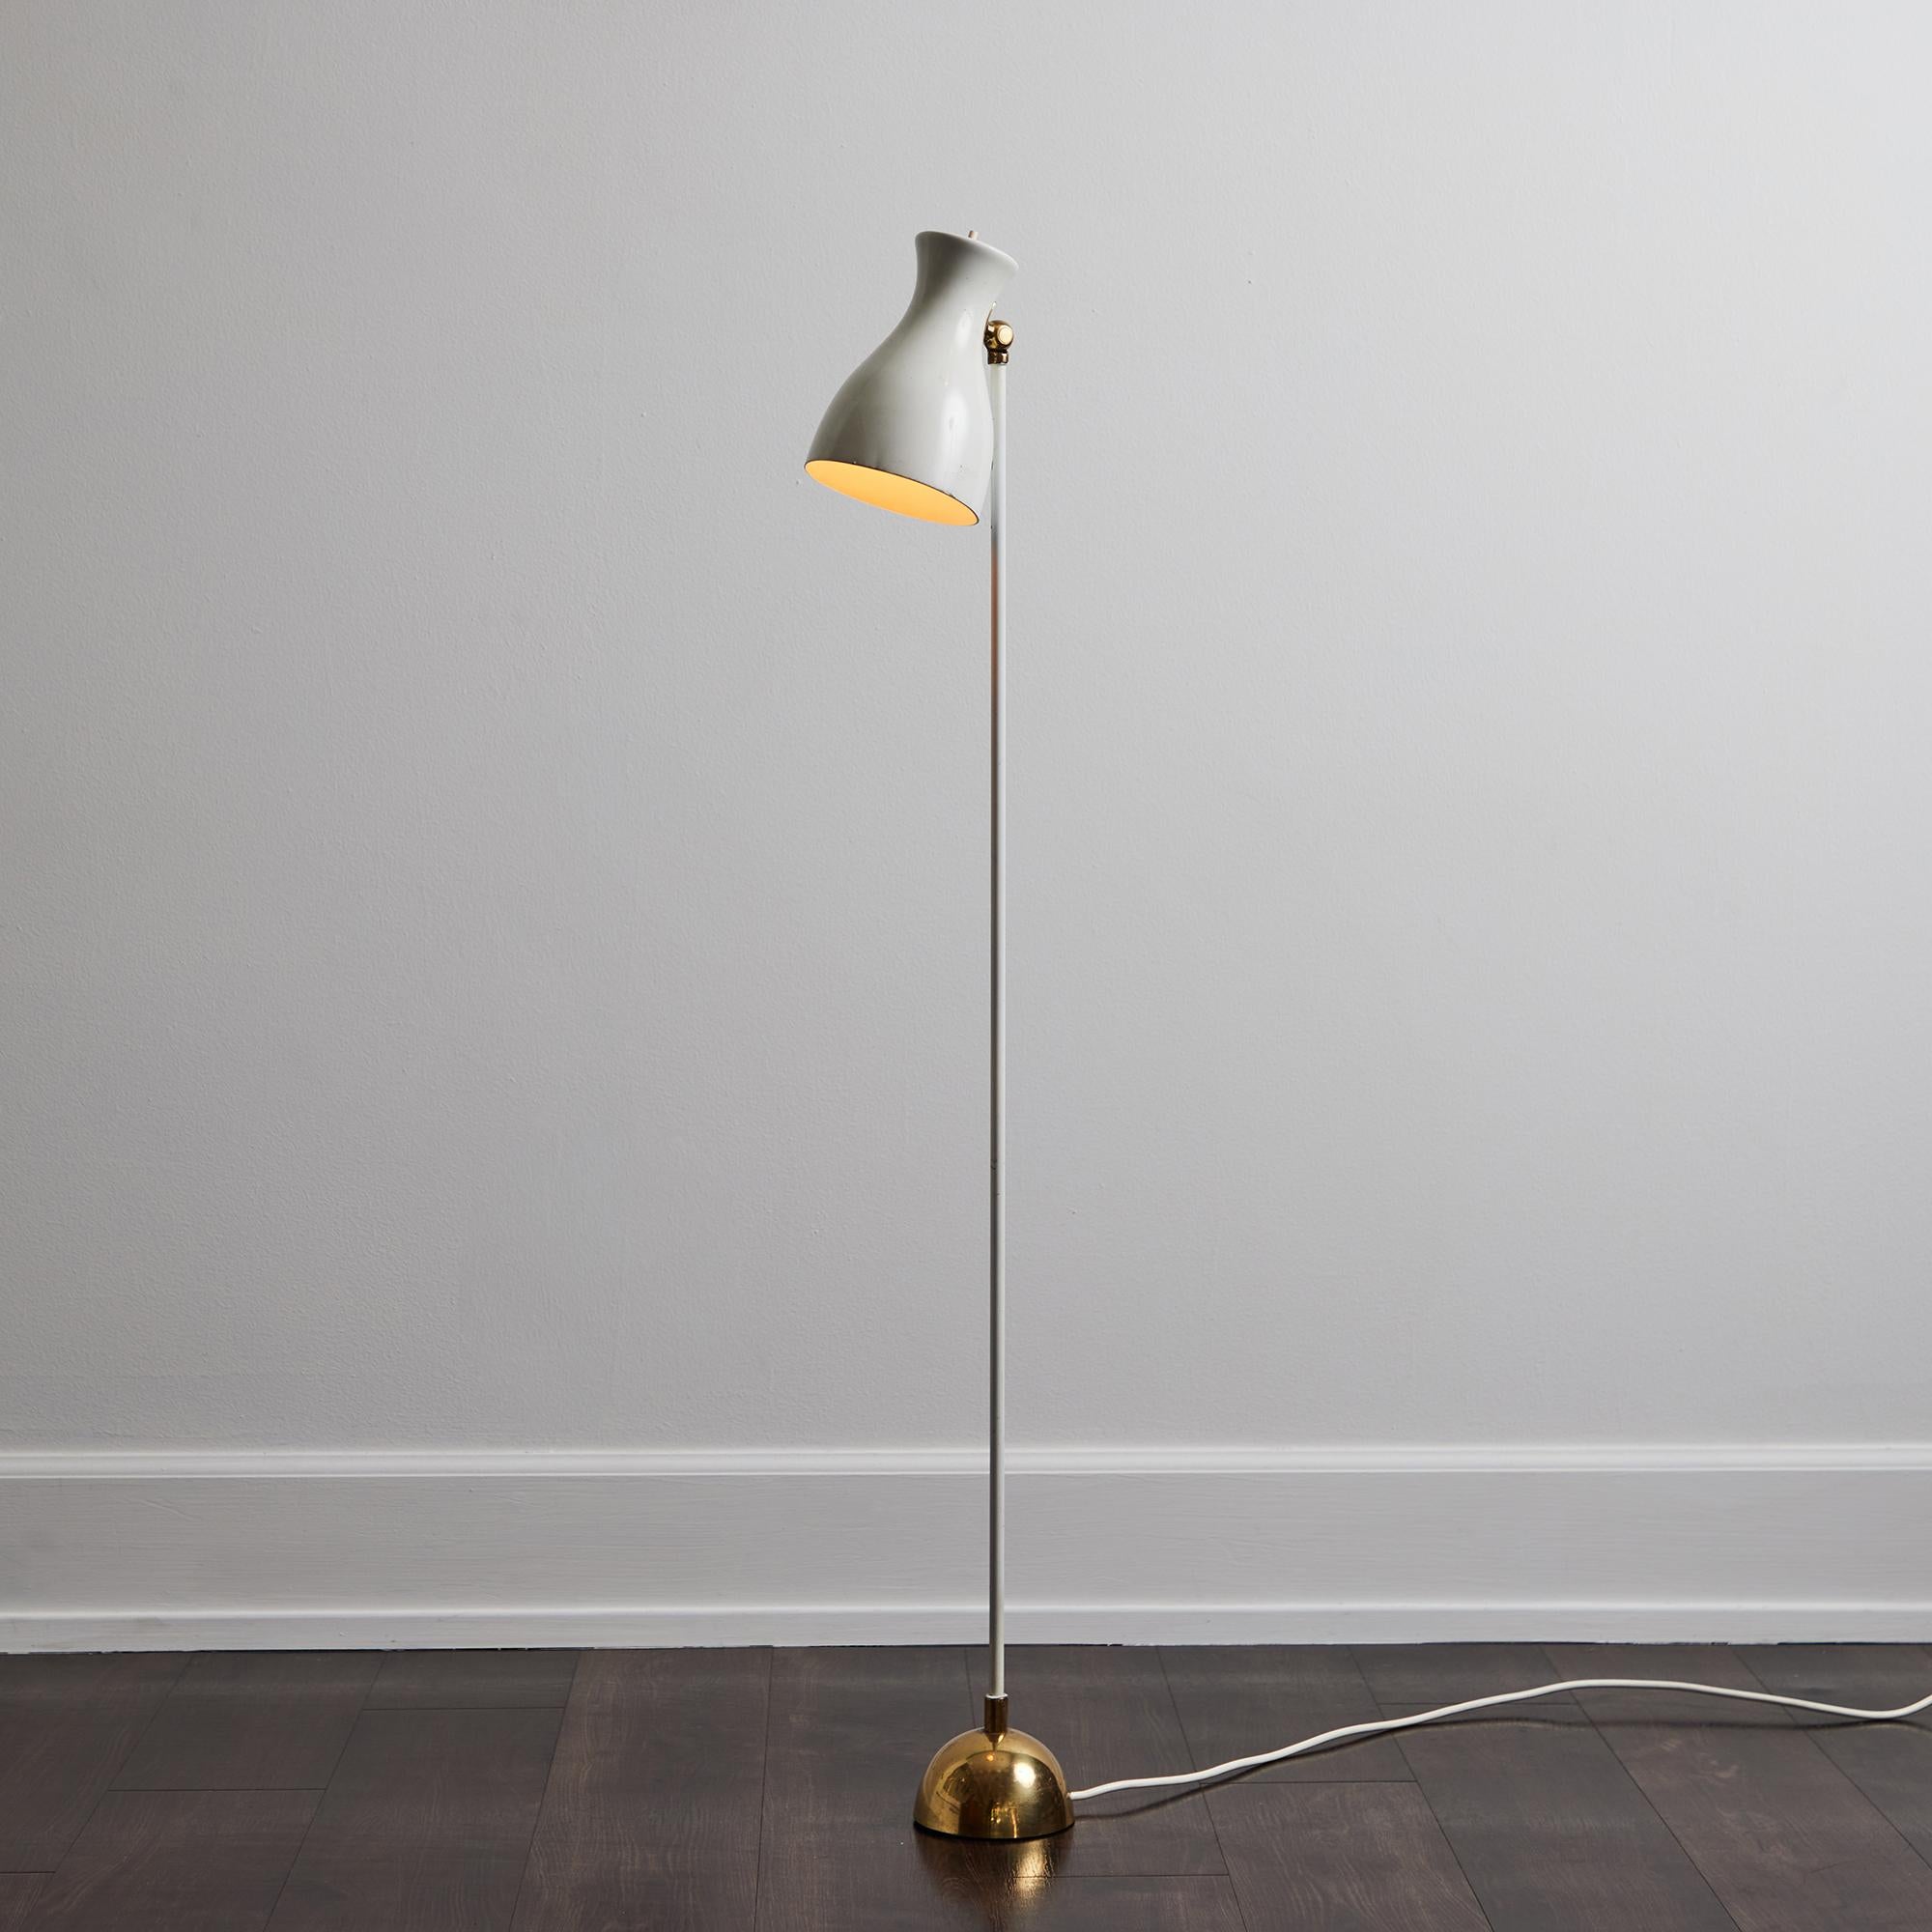 1950s Dieter Schulz Model No. 57/416 Floor Lamp for Wohnbedarf AG Schweiz. 

Executed in white painted metal and brass. A quintessentially midcentury European design that is highly functional and incomparably refined. Reminiscent of and often